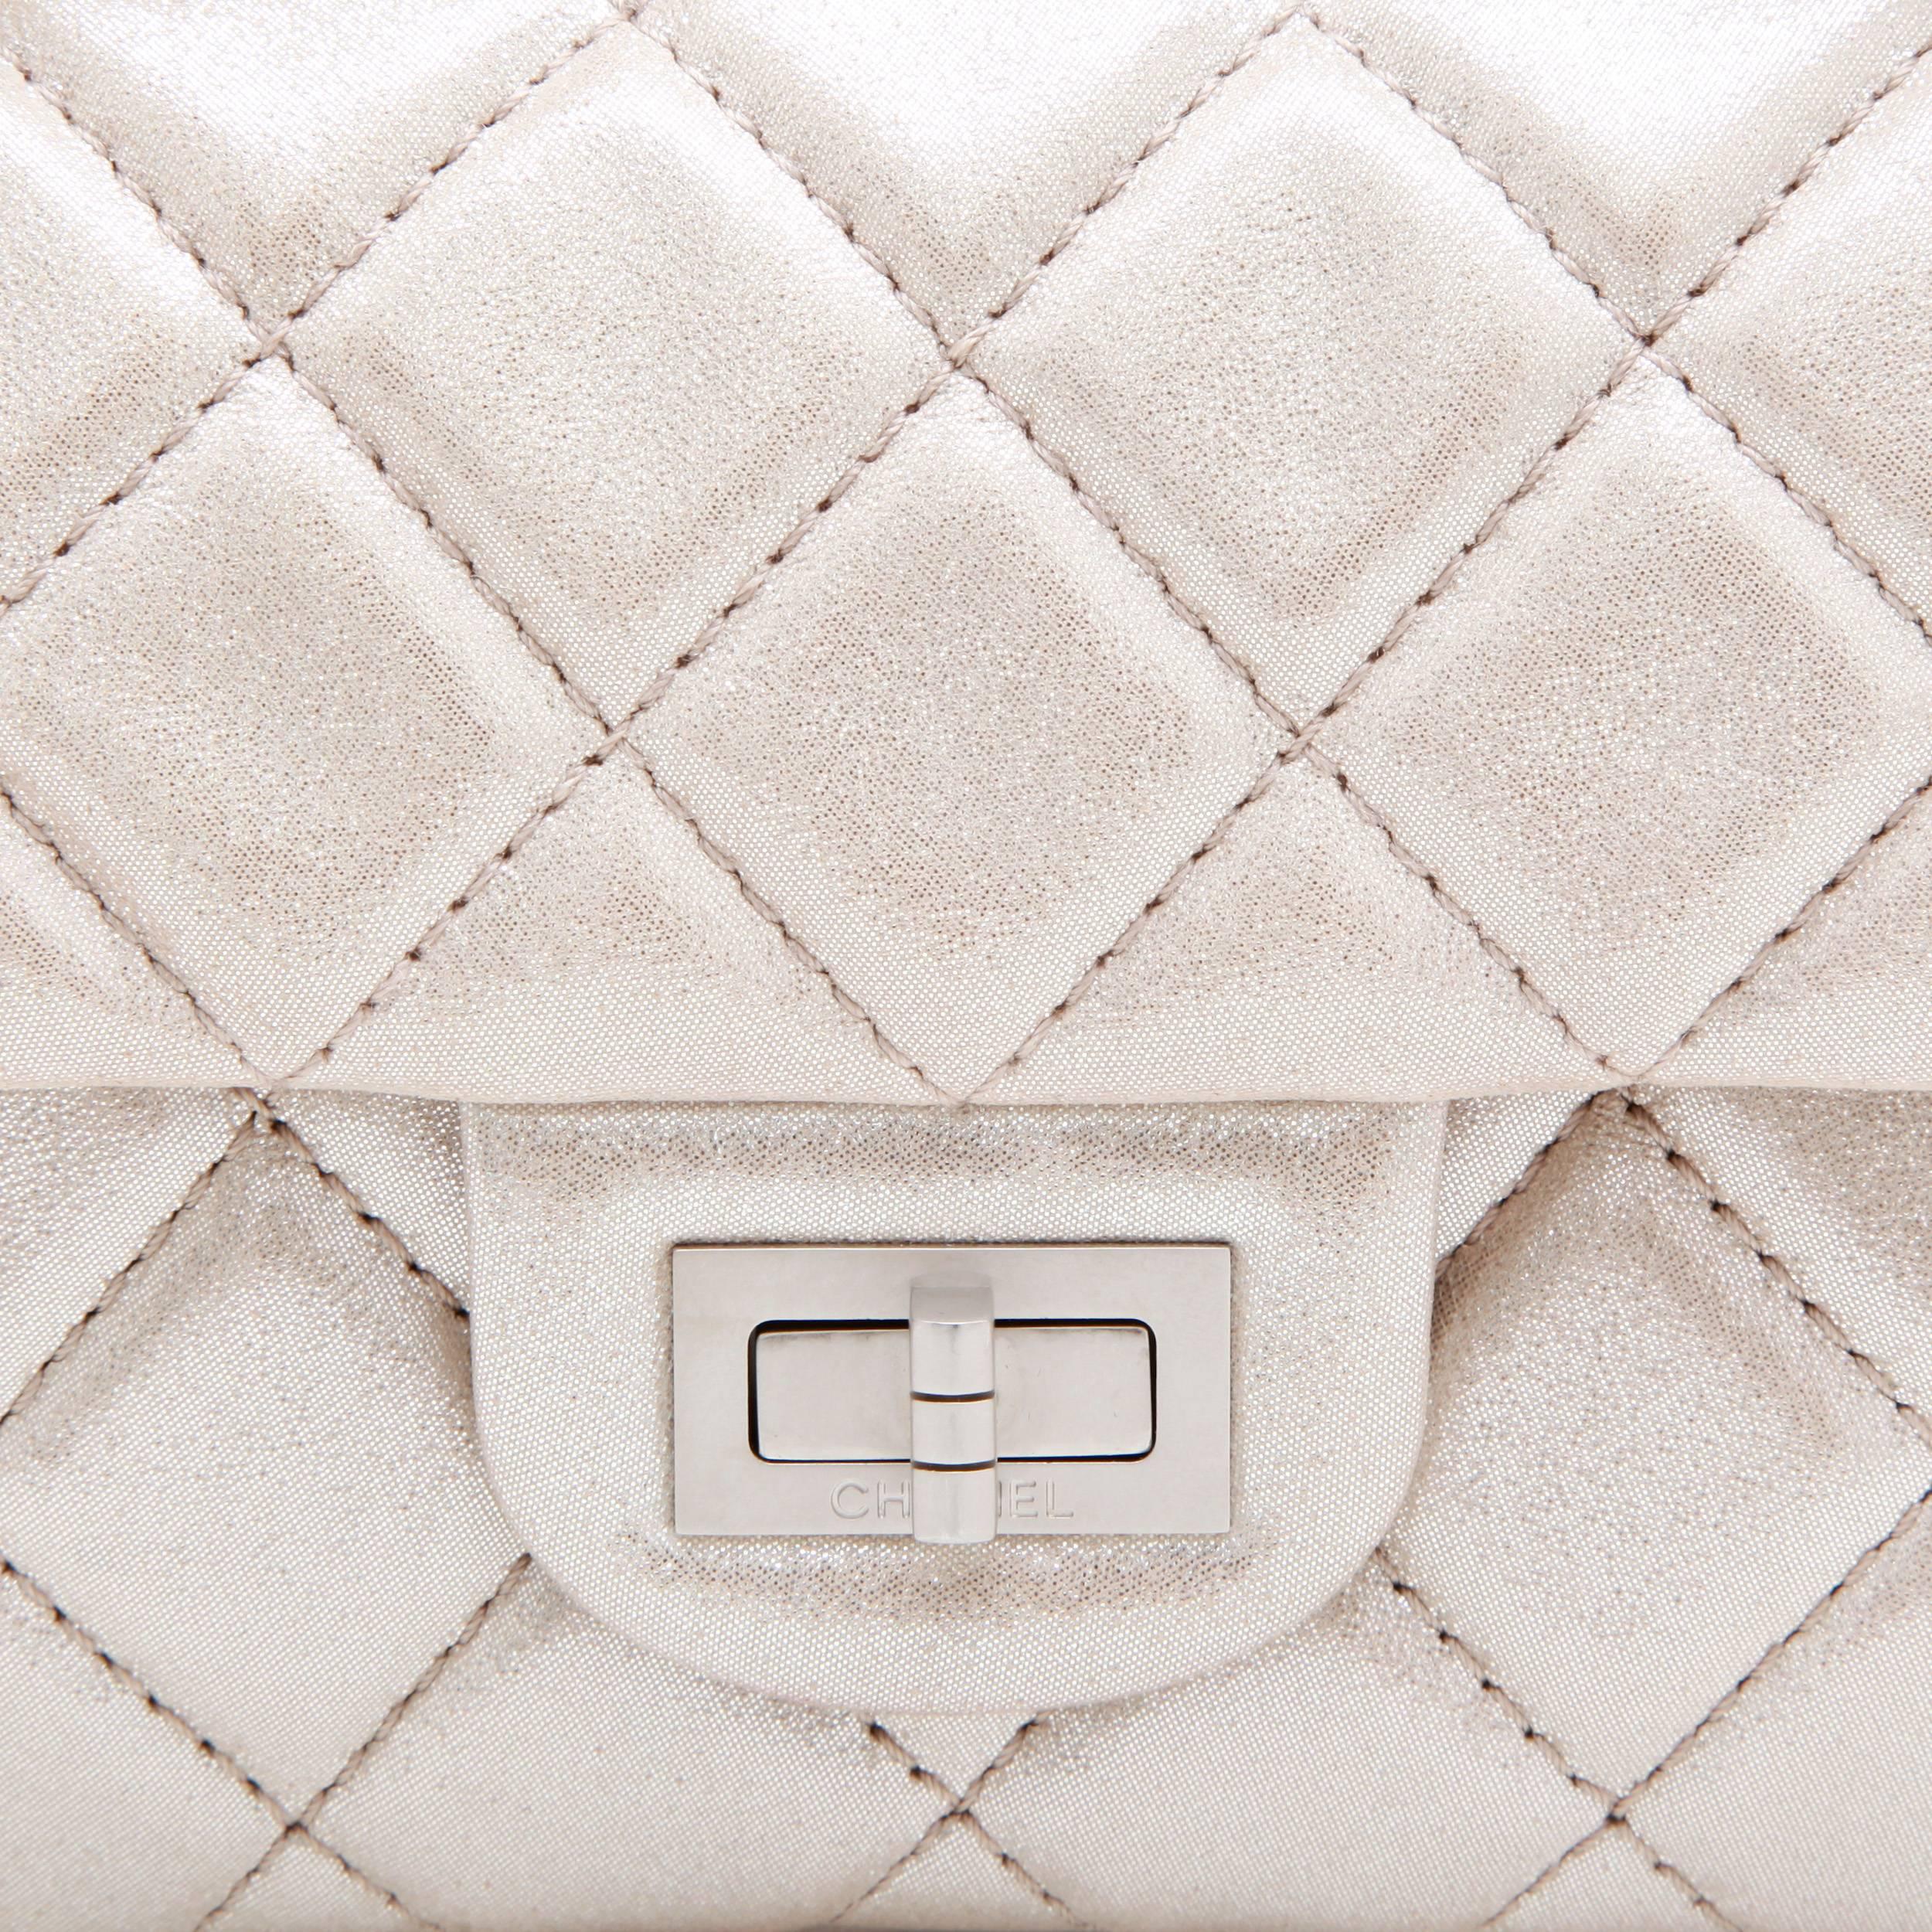 CHANEL Evening Bag in Light Iridescent Silver Lamé Leather 3